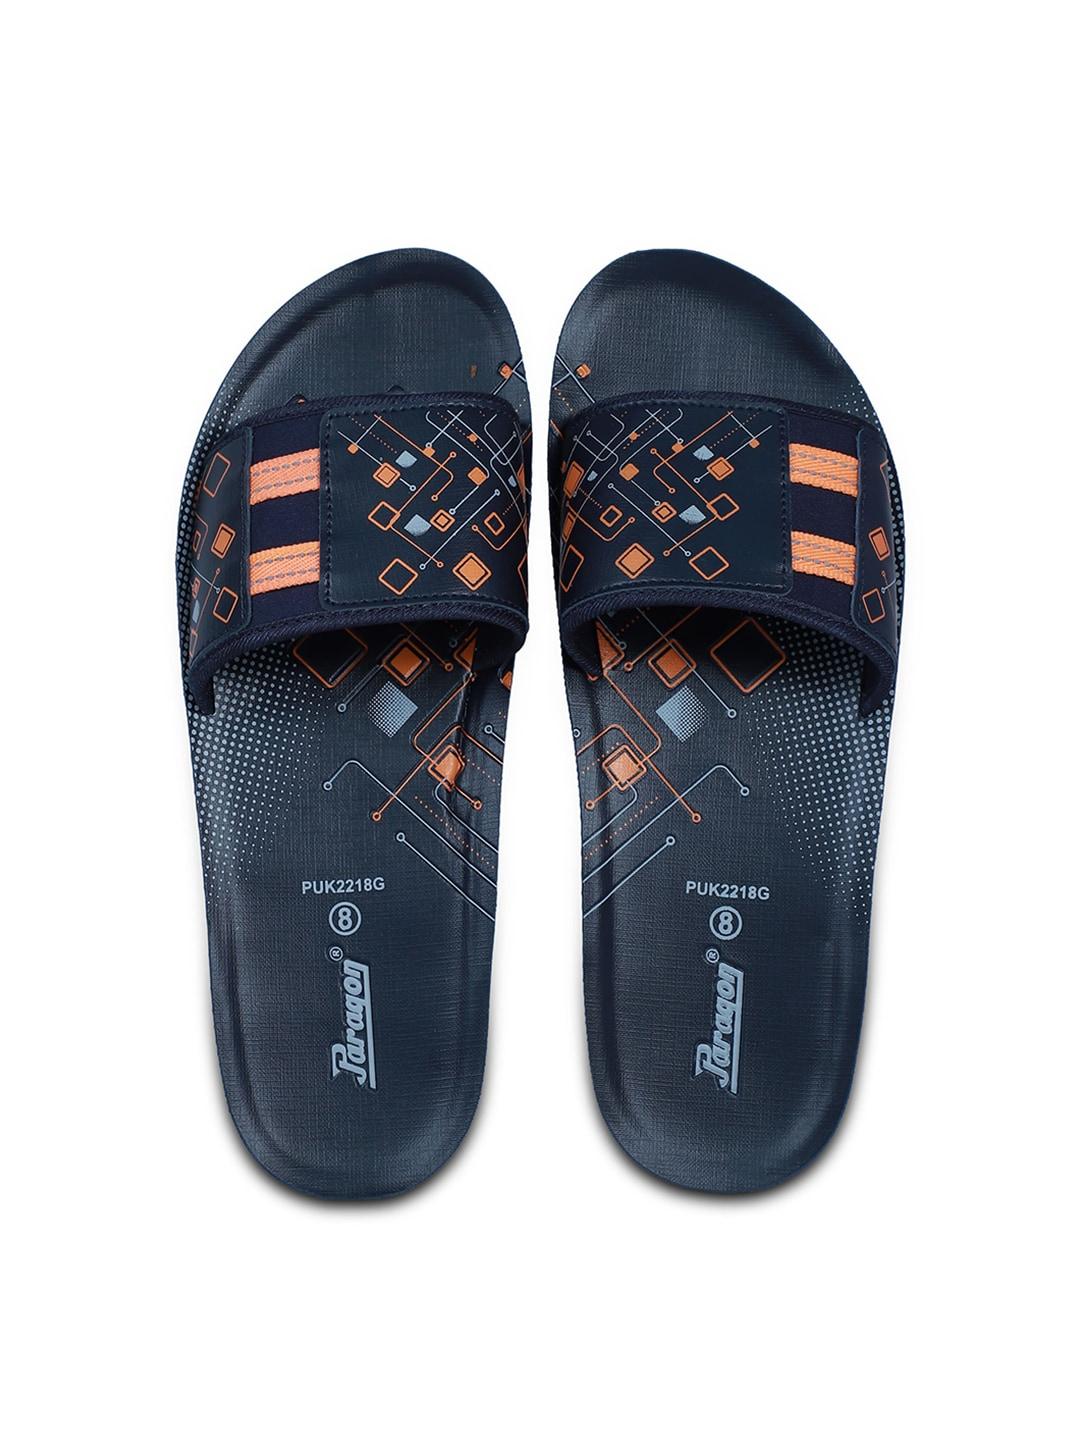 paragon-men-printed-ultra-comfortable-and-lightweight-sliders